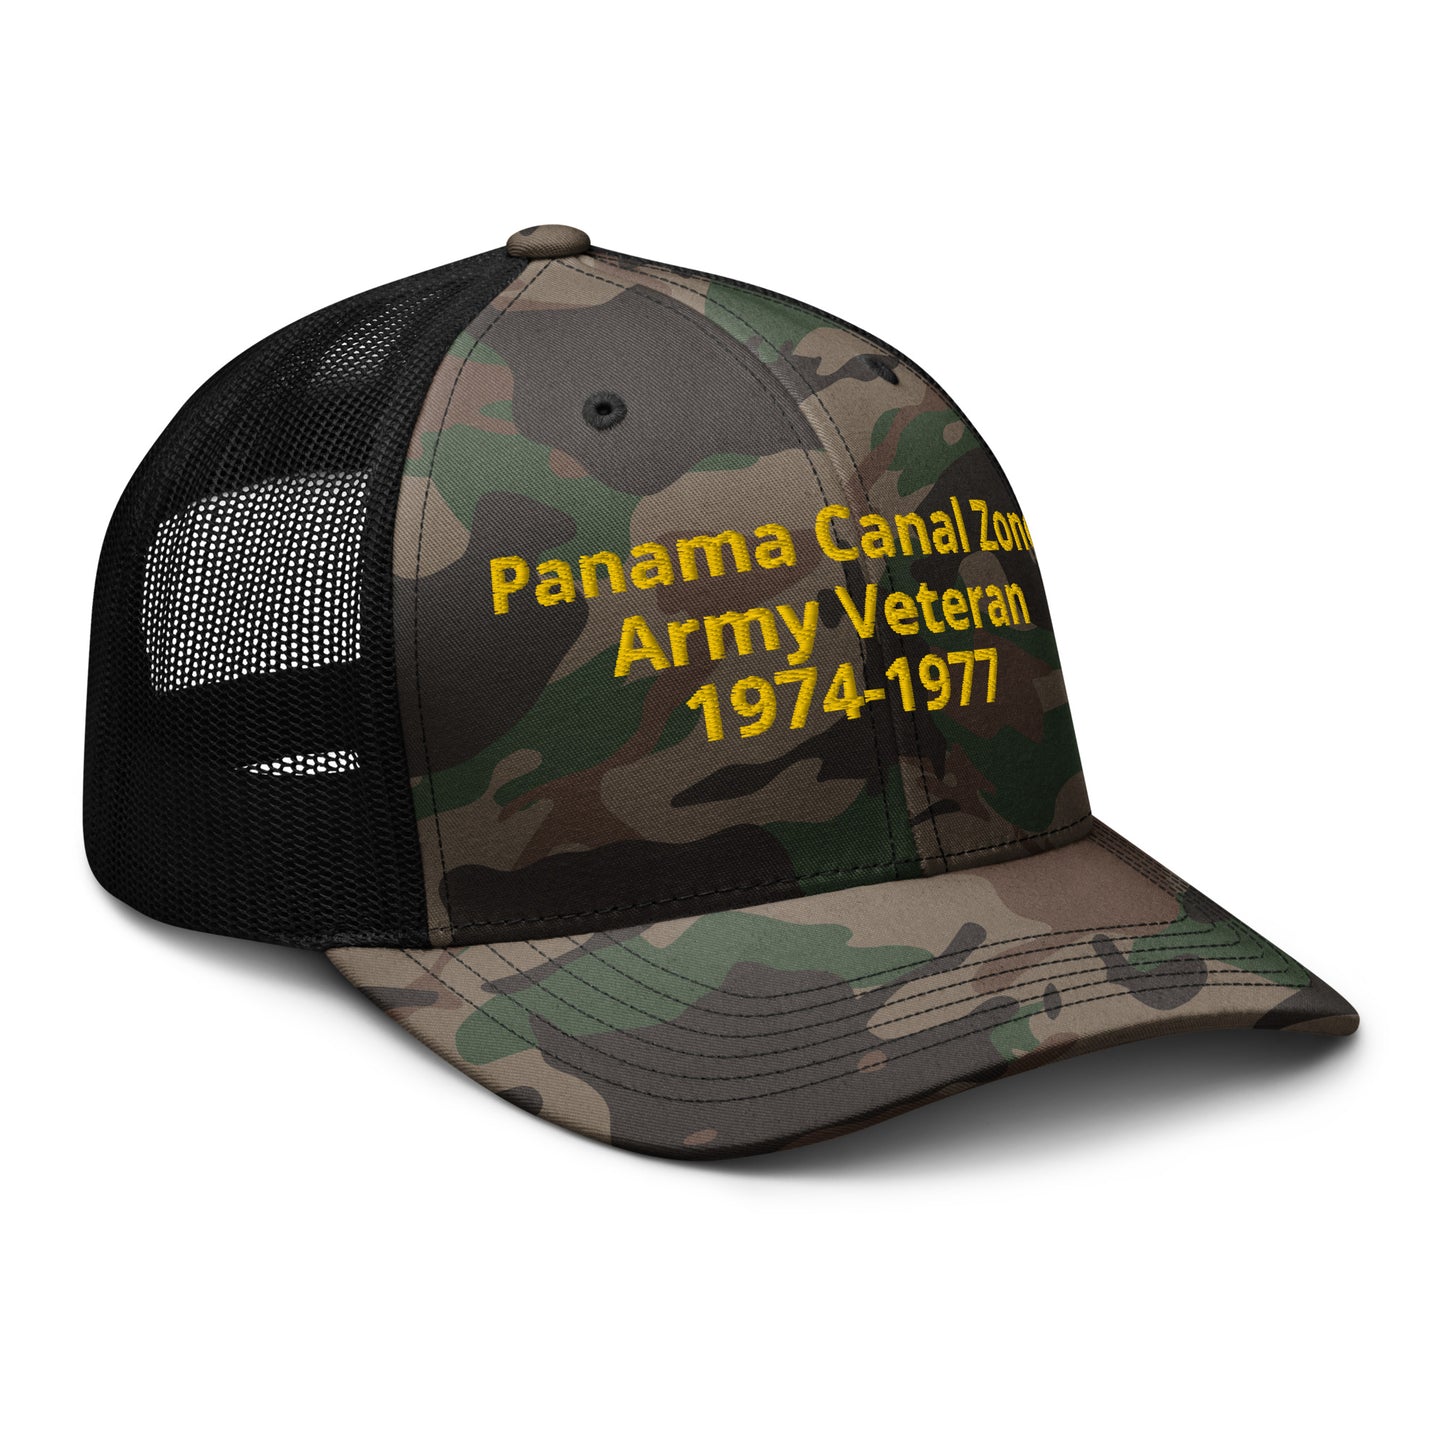 Personalize your Camouflage trucker hat